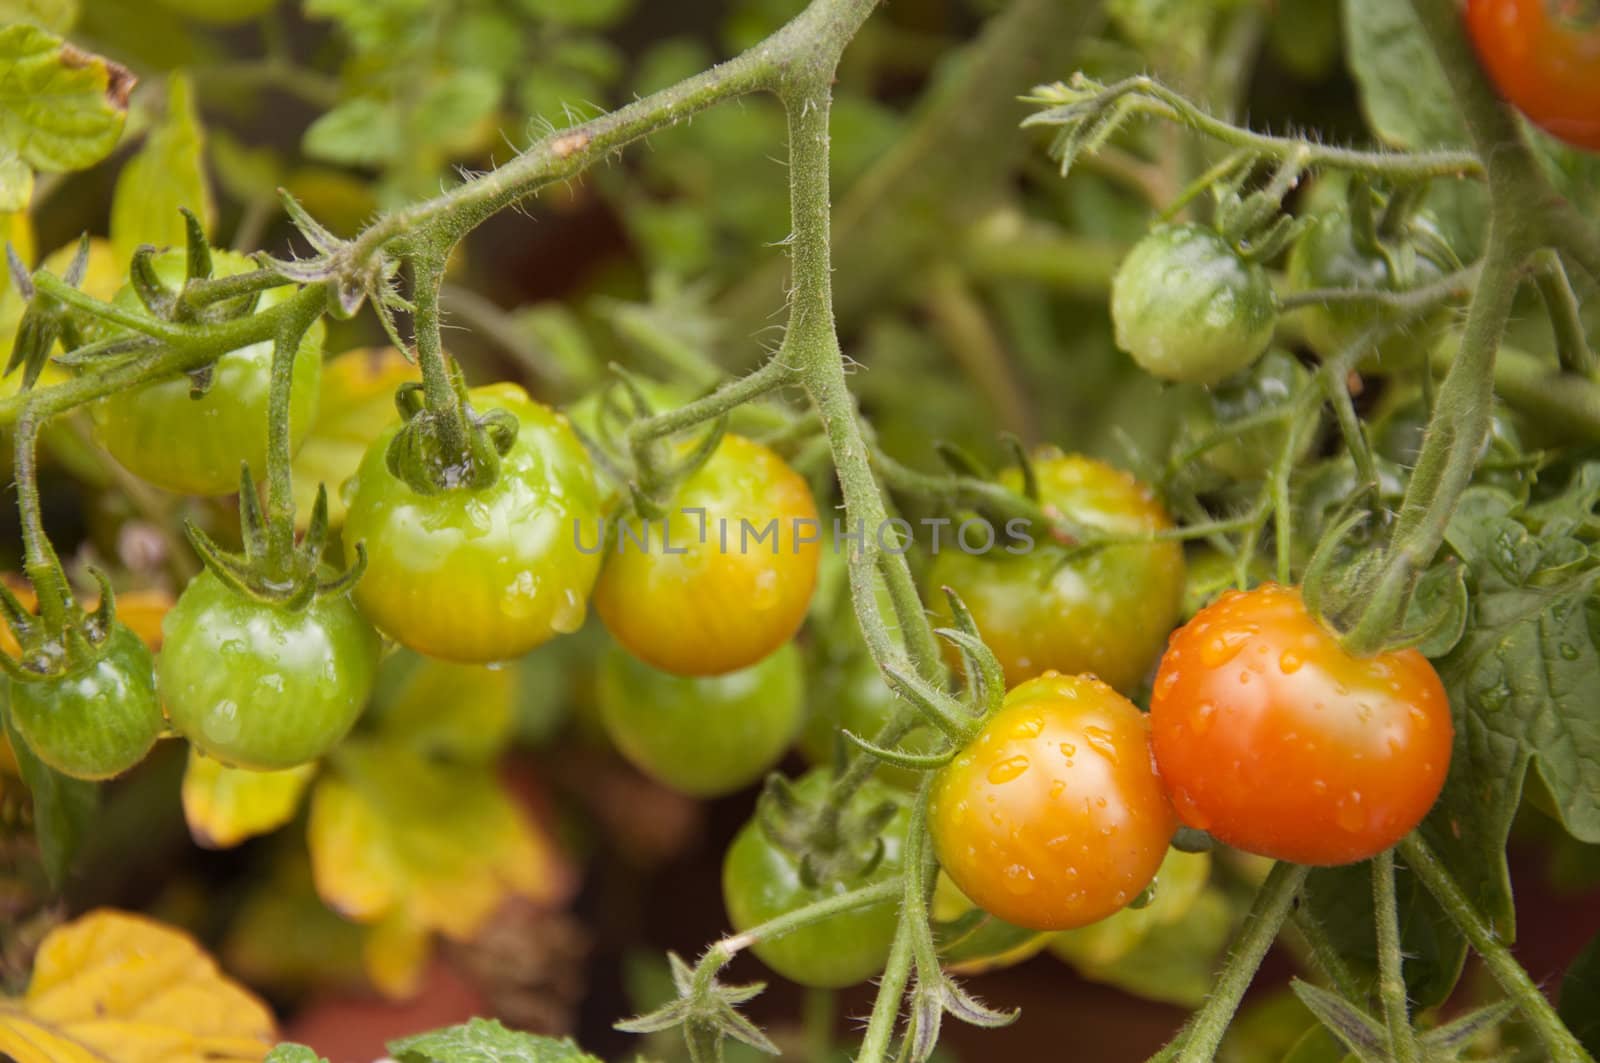 Tomatoes ripening in the garden by kdreams02